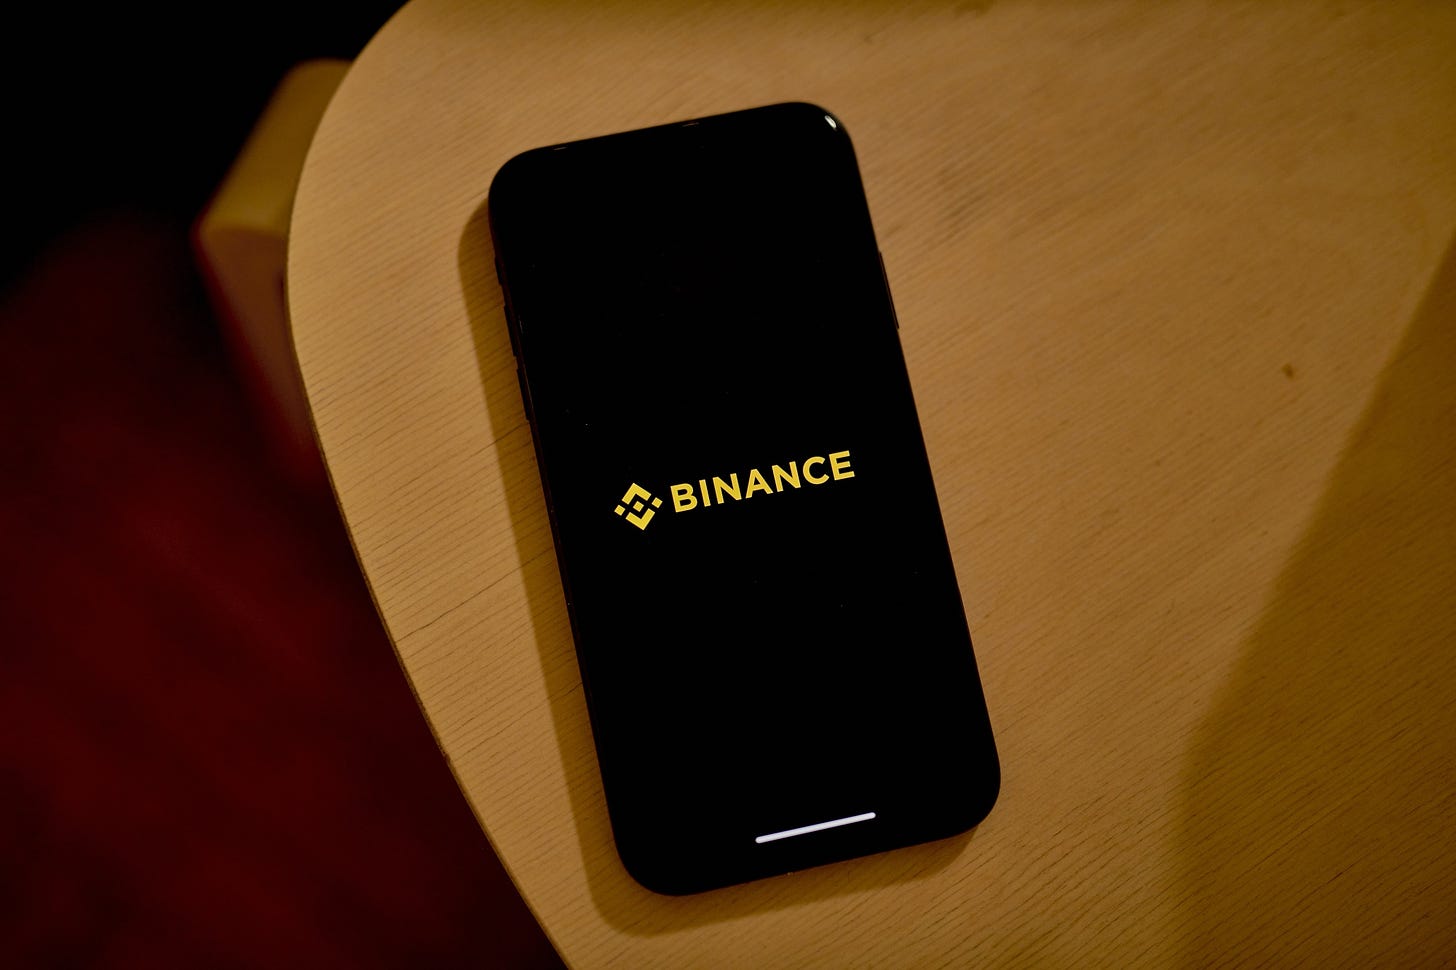 SEC Targets $120 Billion of Tokens With Coinbase And Binance Suits